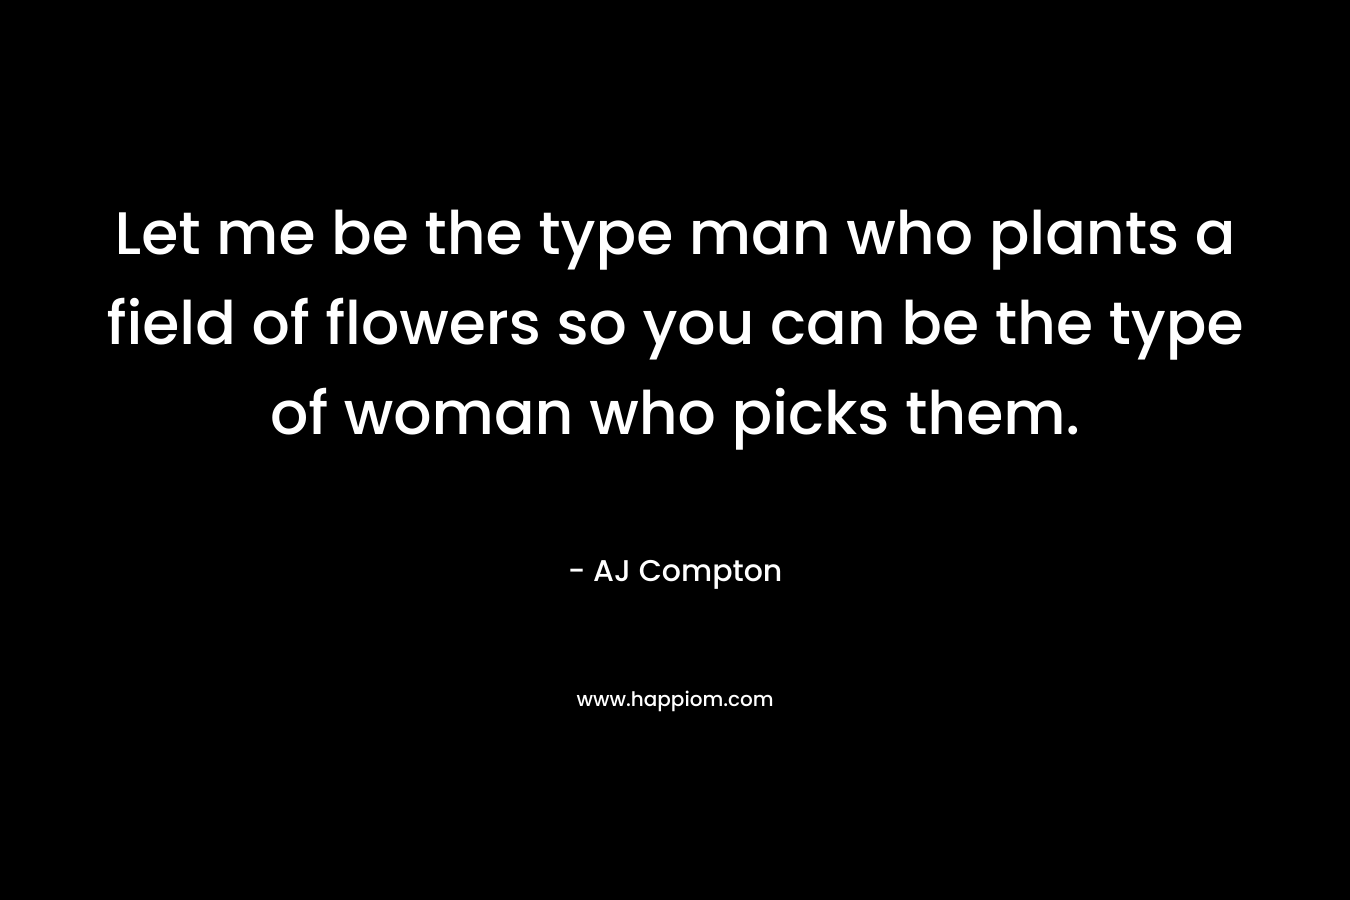 Let me be the type man who plants a field of flowers so you can be the type of woman who picks them.